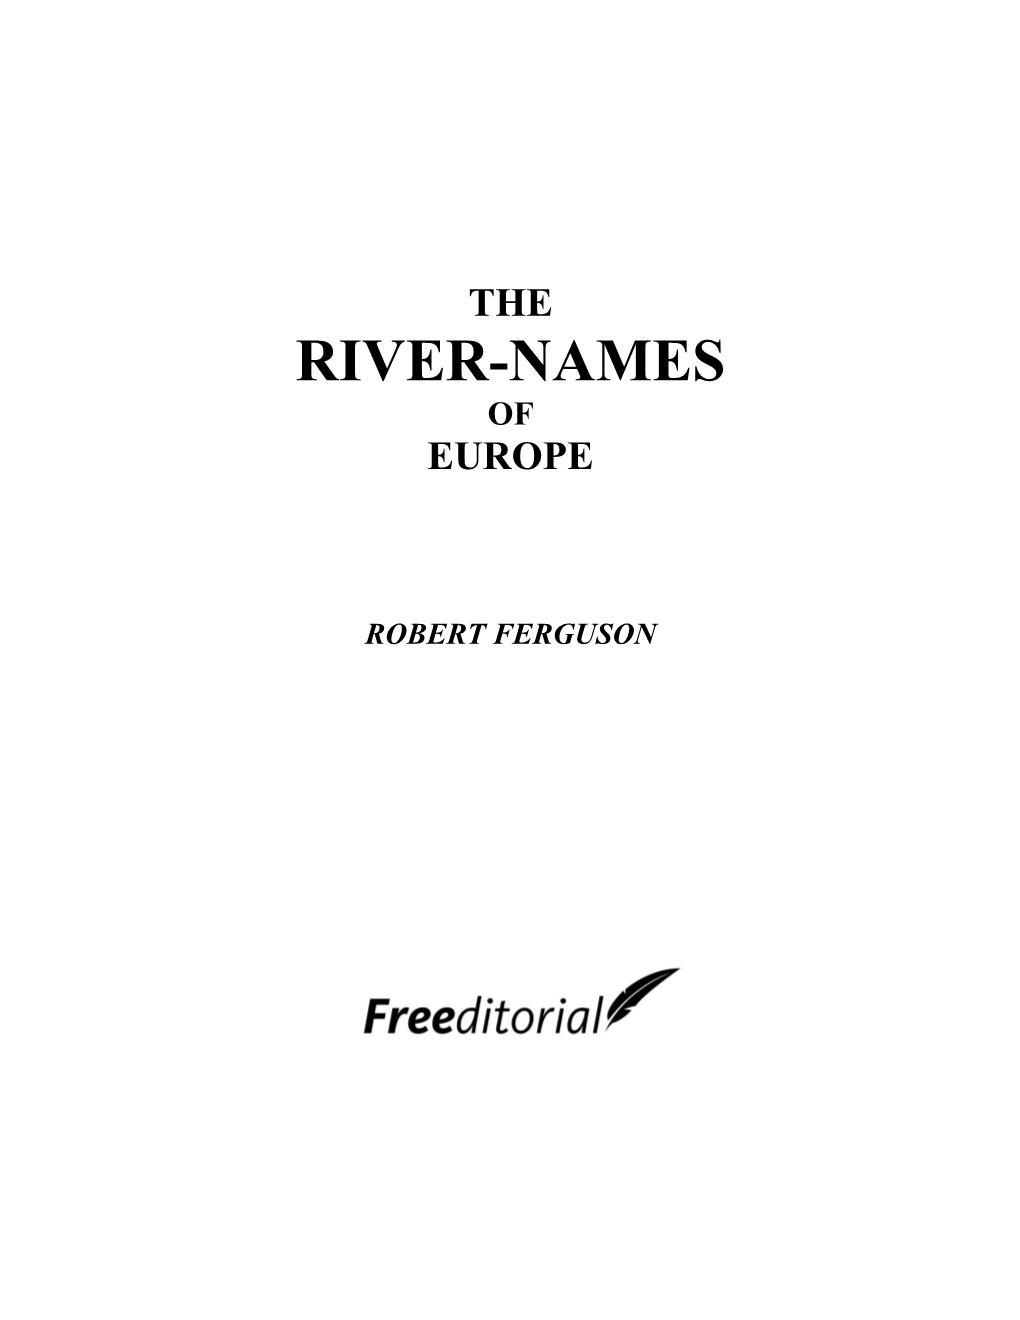 River-Names of Europe